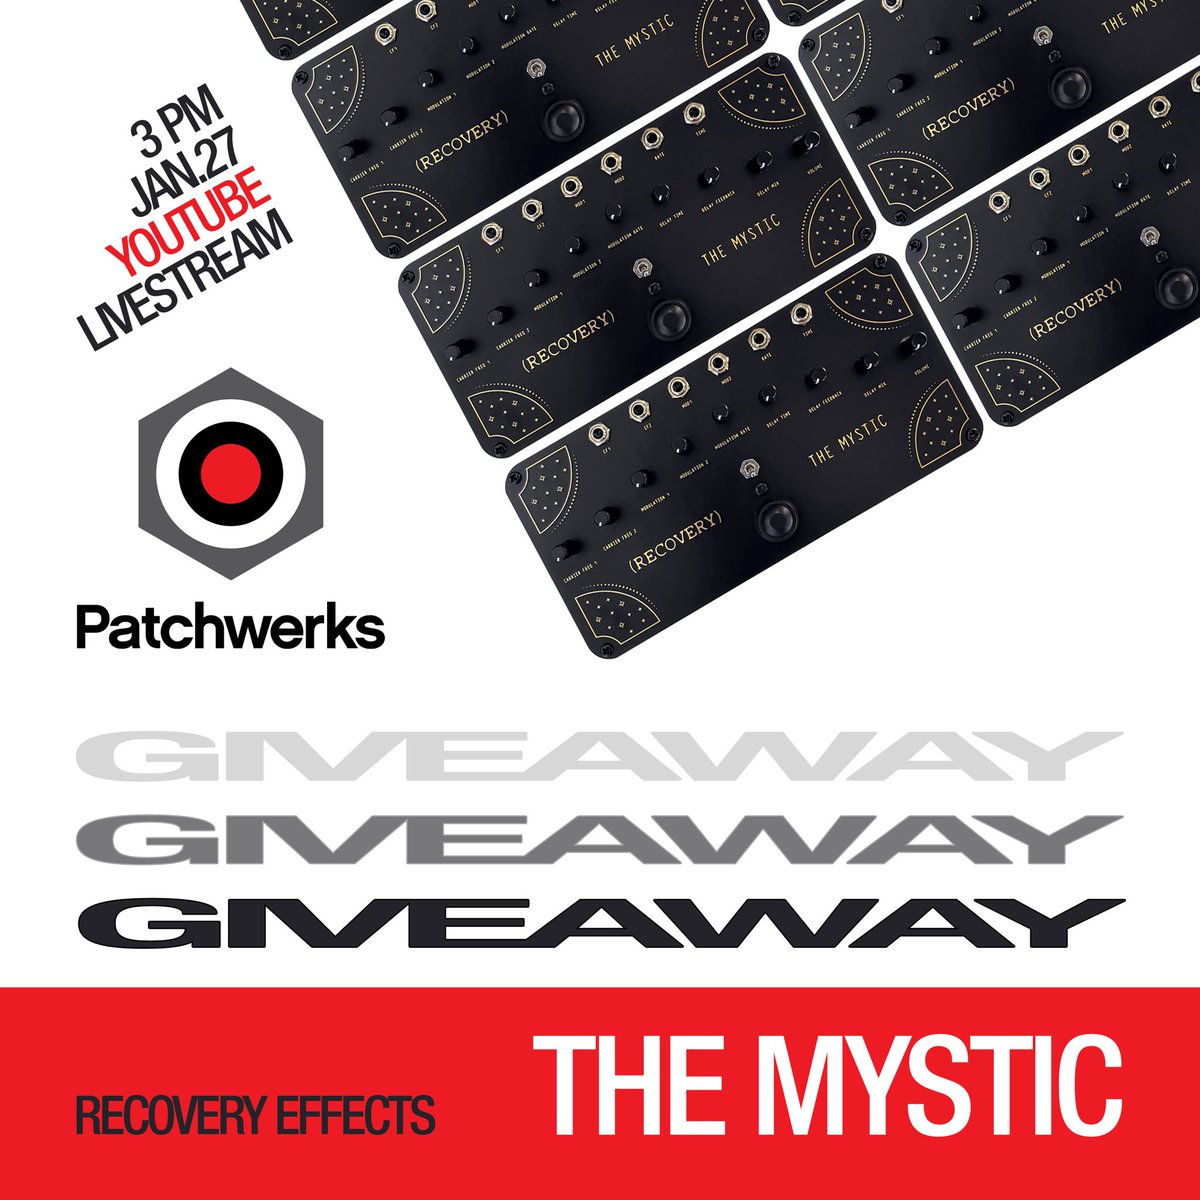 Tune in Friday 1/27 at 3pm for a special episode of Patchwerks Live where one lucky viewer will WIN The Mystic from @recoveryeffects ✨ 

Link to enter + entry details = bit.ly/MysticGiveaway See you in chat~